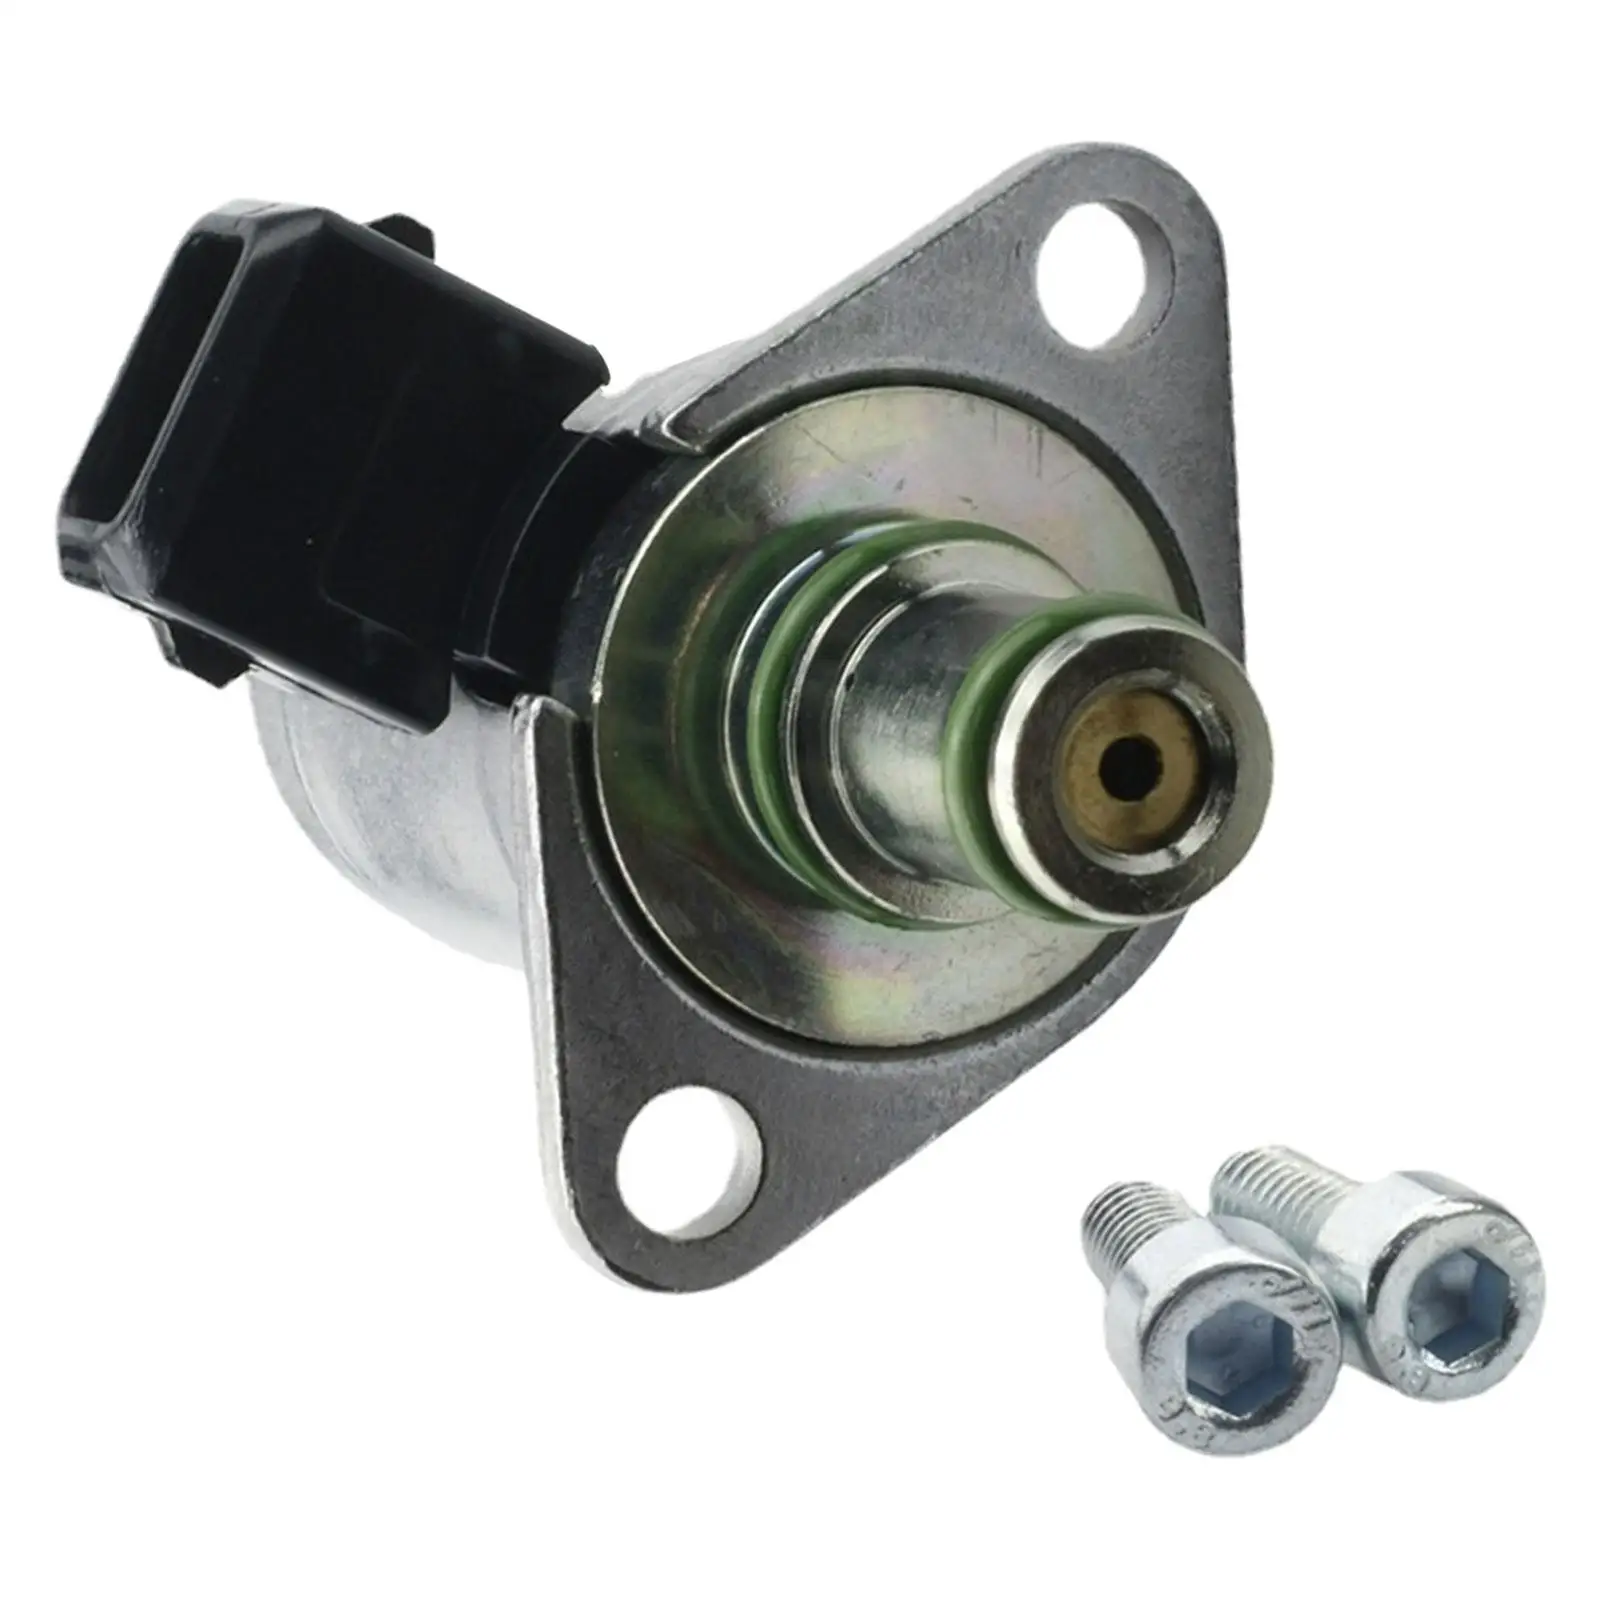 A2114600984 Spare Parts Durable Replaces High Performance Steering Solenoid Valve 2114600884 1644600300 for Mercedes-benz